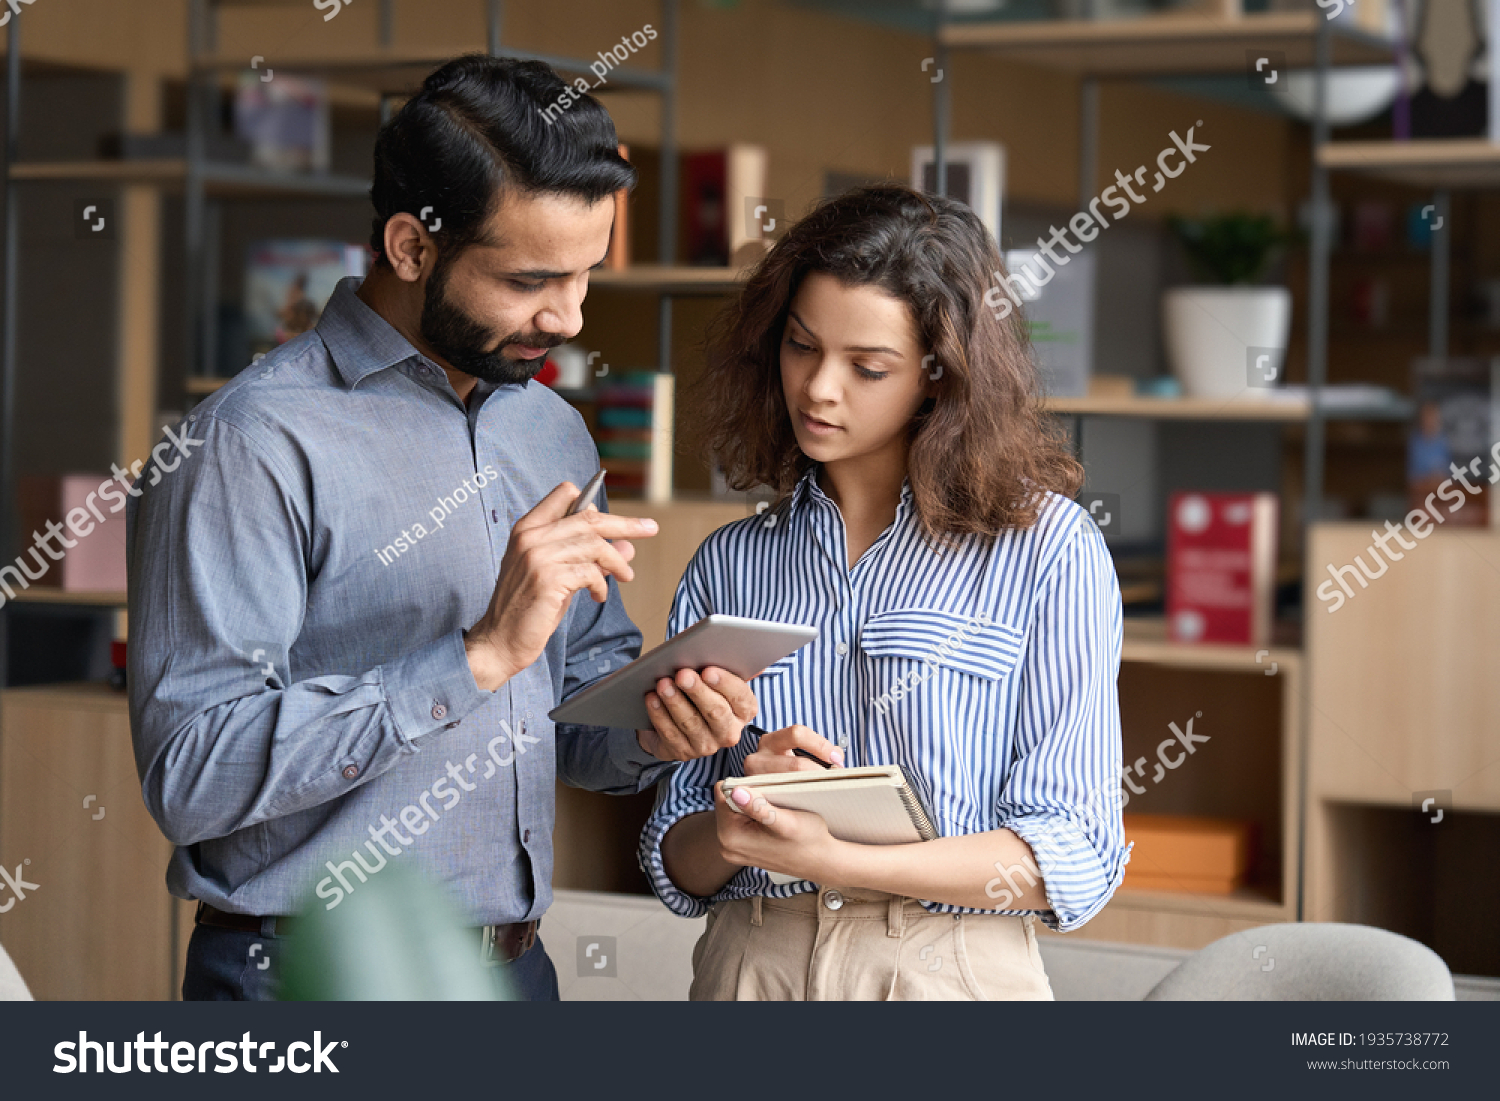 Indian manager holding digital tablet having discussion with latin employee meeting in office lobby. Two diverse professionals talking using pad discussing project strategy, checking corporate plan. #1935738772